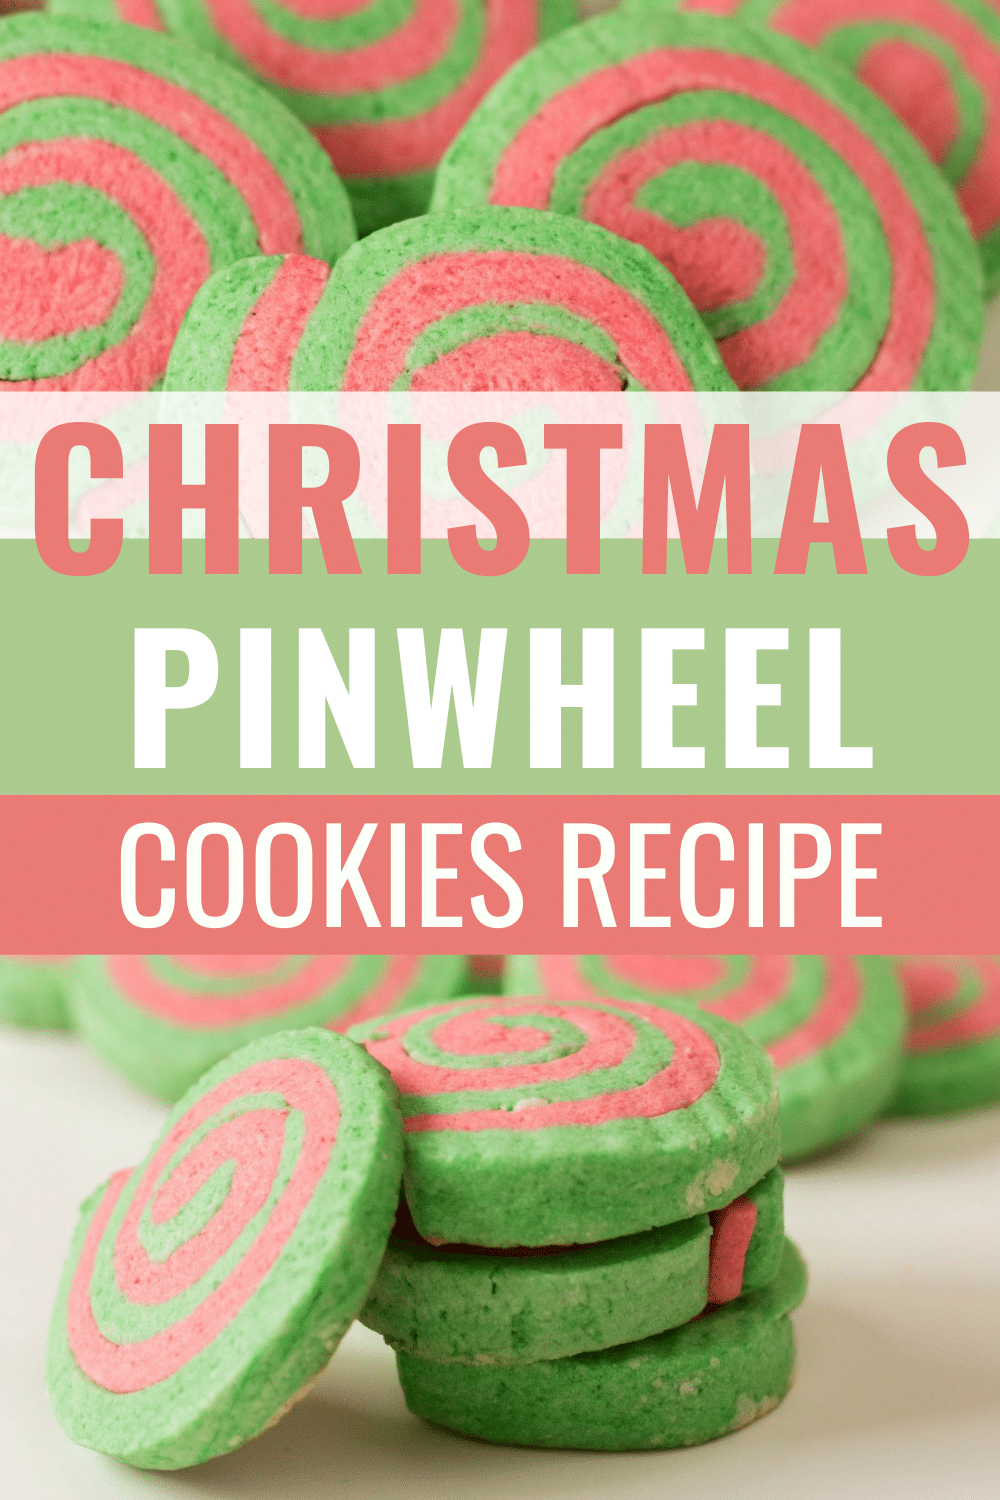 A collage of two images of Christmas Pinwheel Cookies with a large text in the middle saying "Christmas Pinwheel Cookies Recipe"